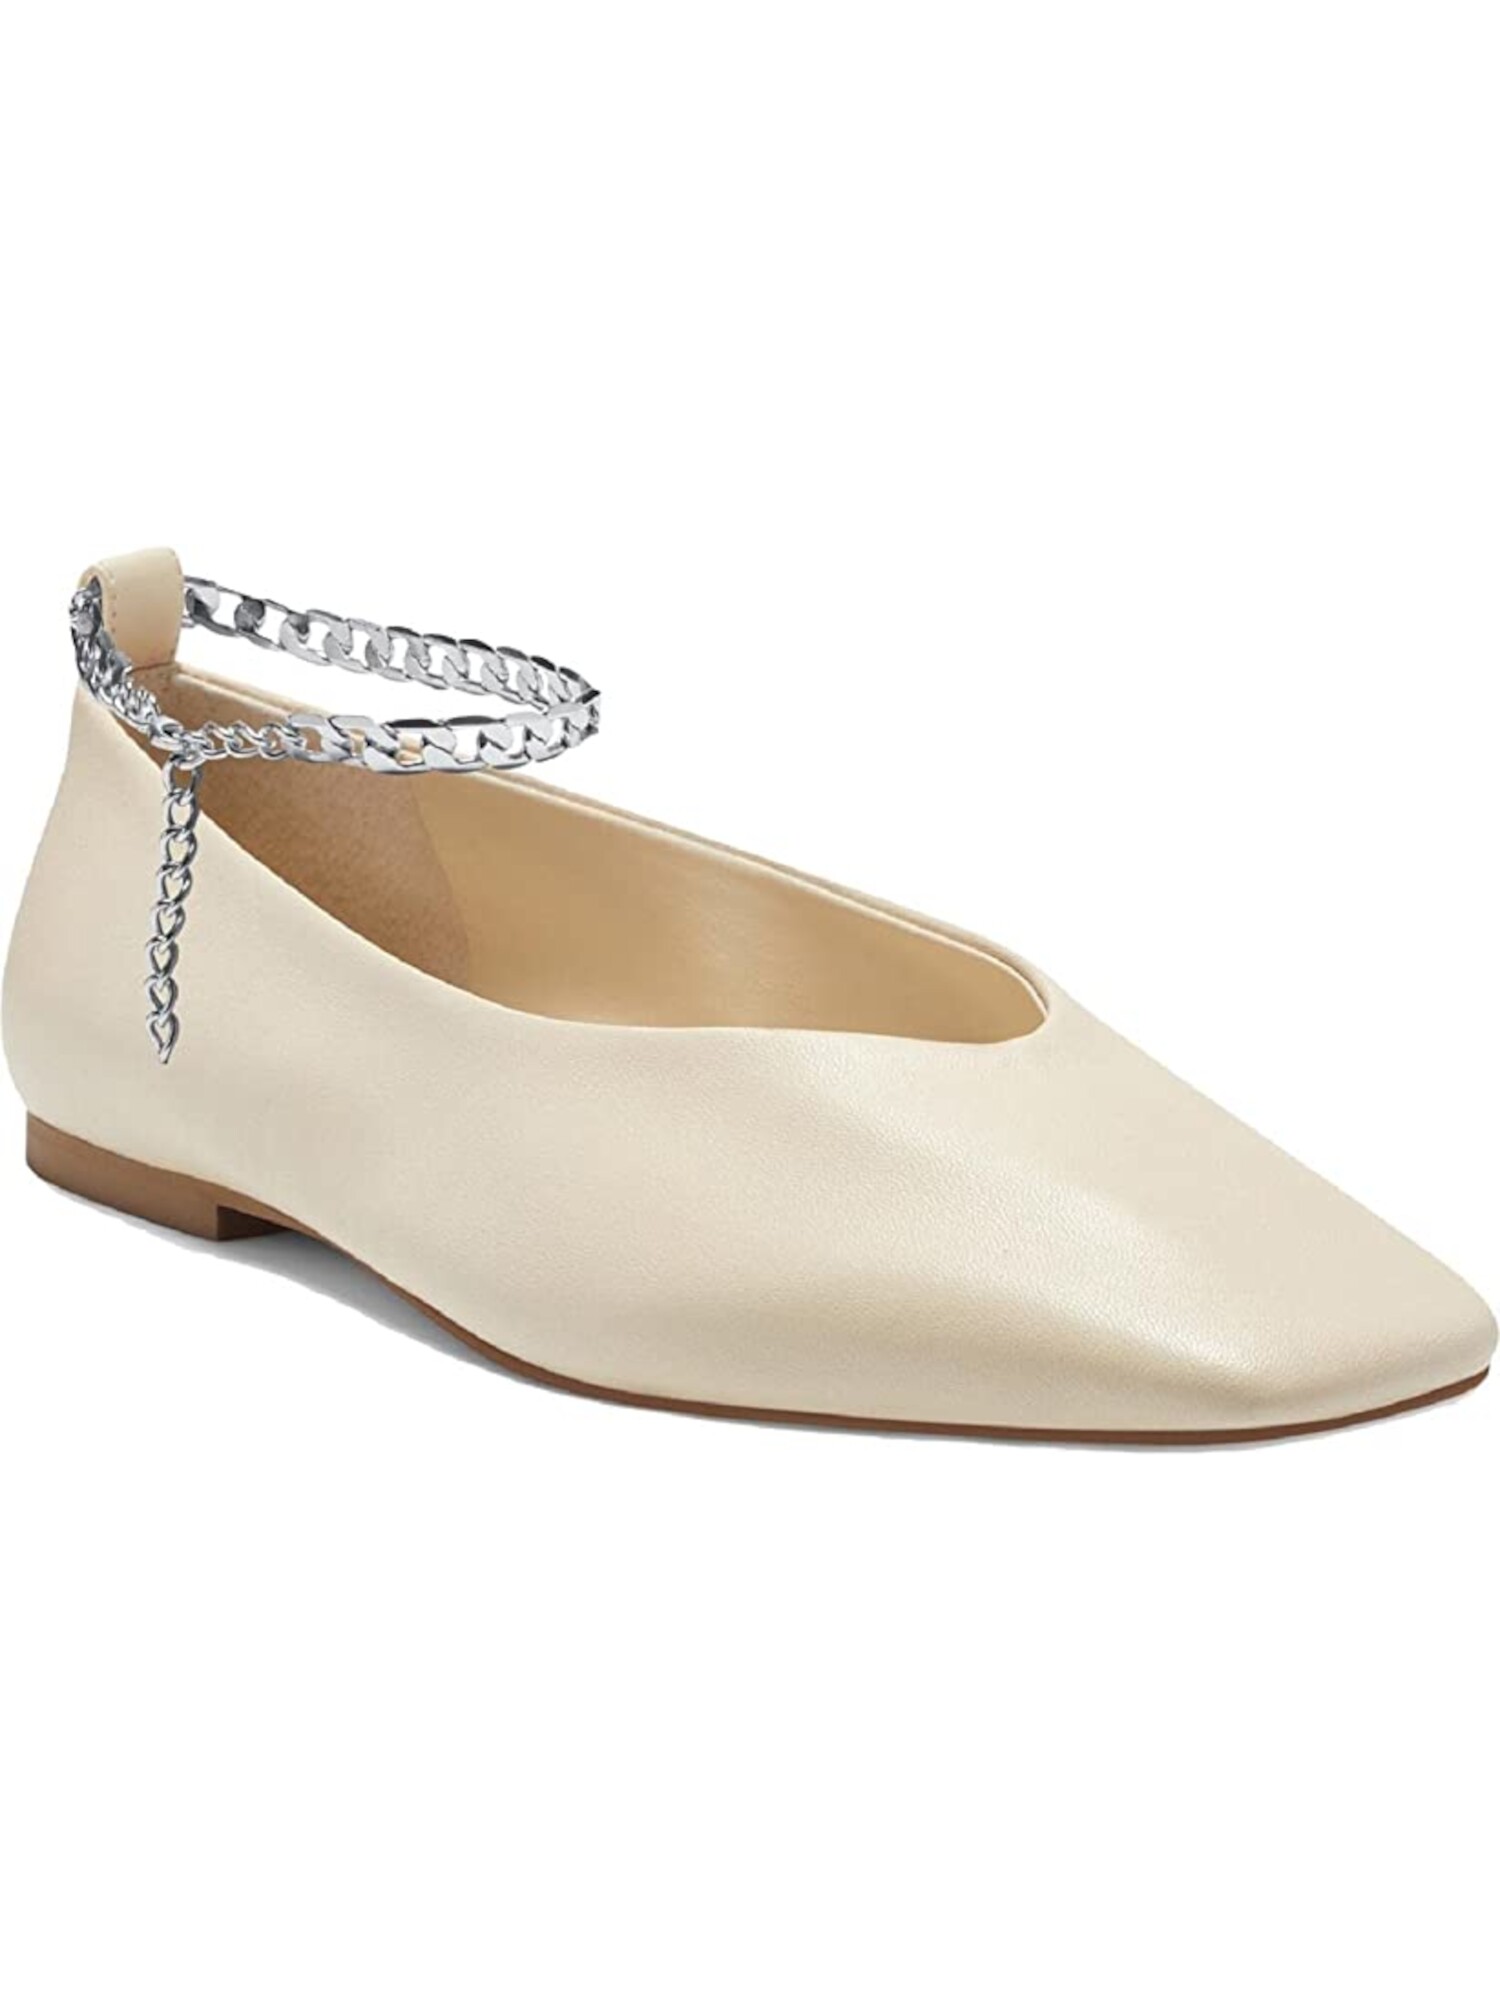 VINCE CAMUTO Womens Beige Chain Accent Comfort Latenla Square Toe Slip On Leather Ballet Flats 9.5 M